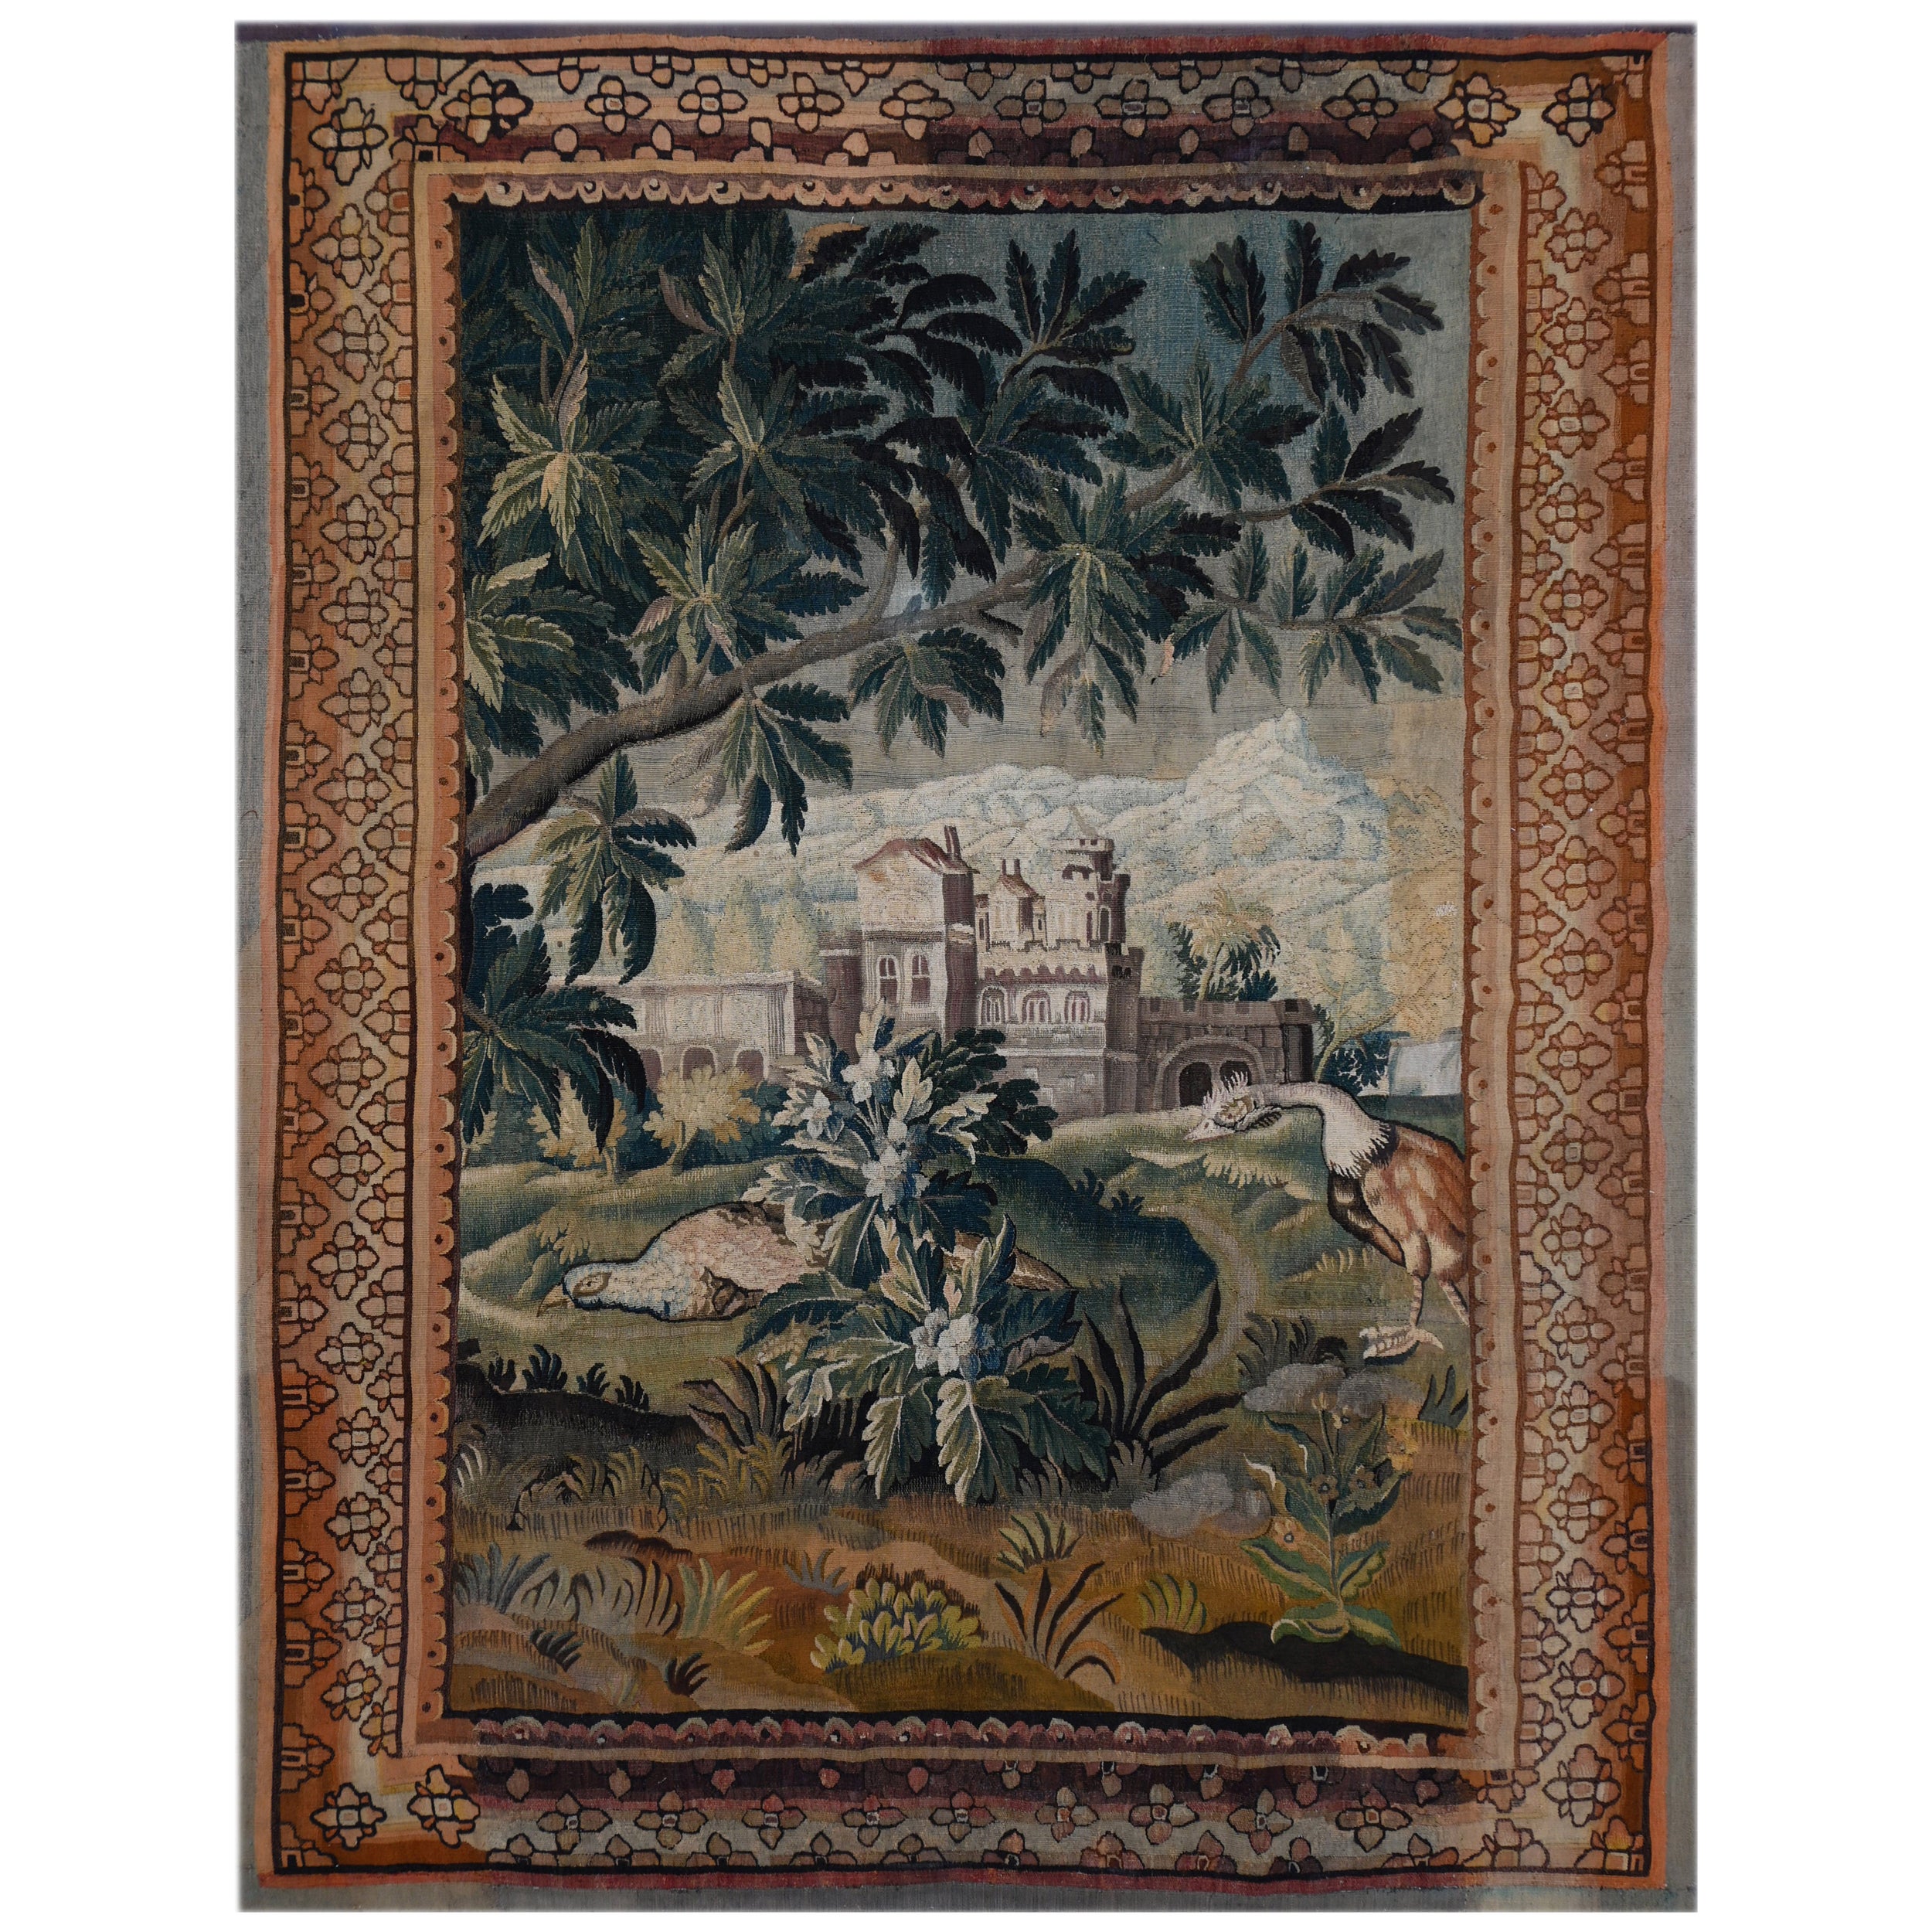 French Greenery Tapestry Aubusson 18th century - 2m67Hx1m97L - N° 1386